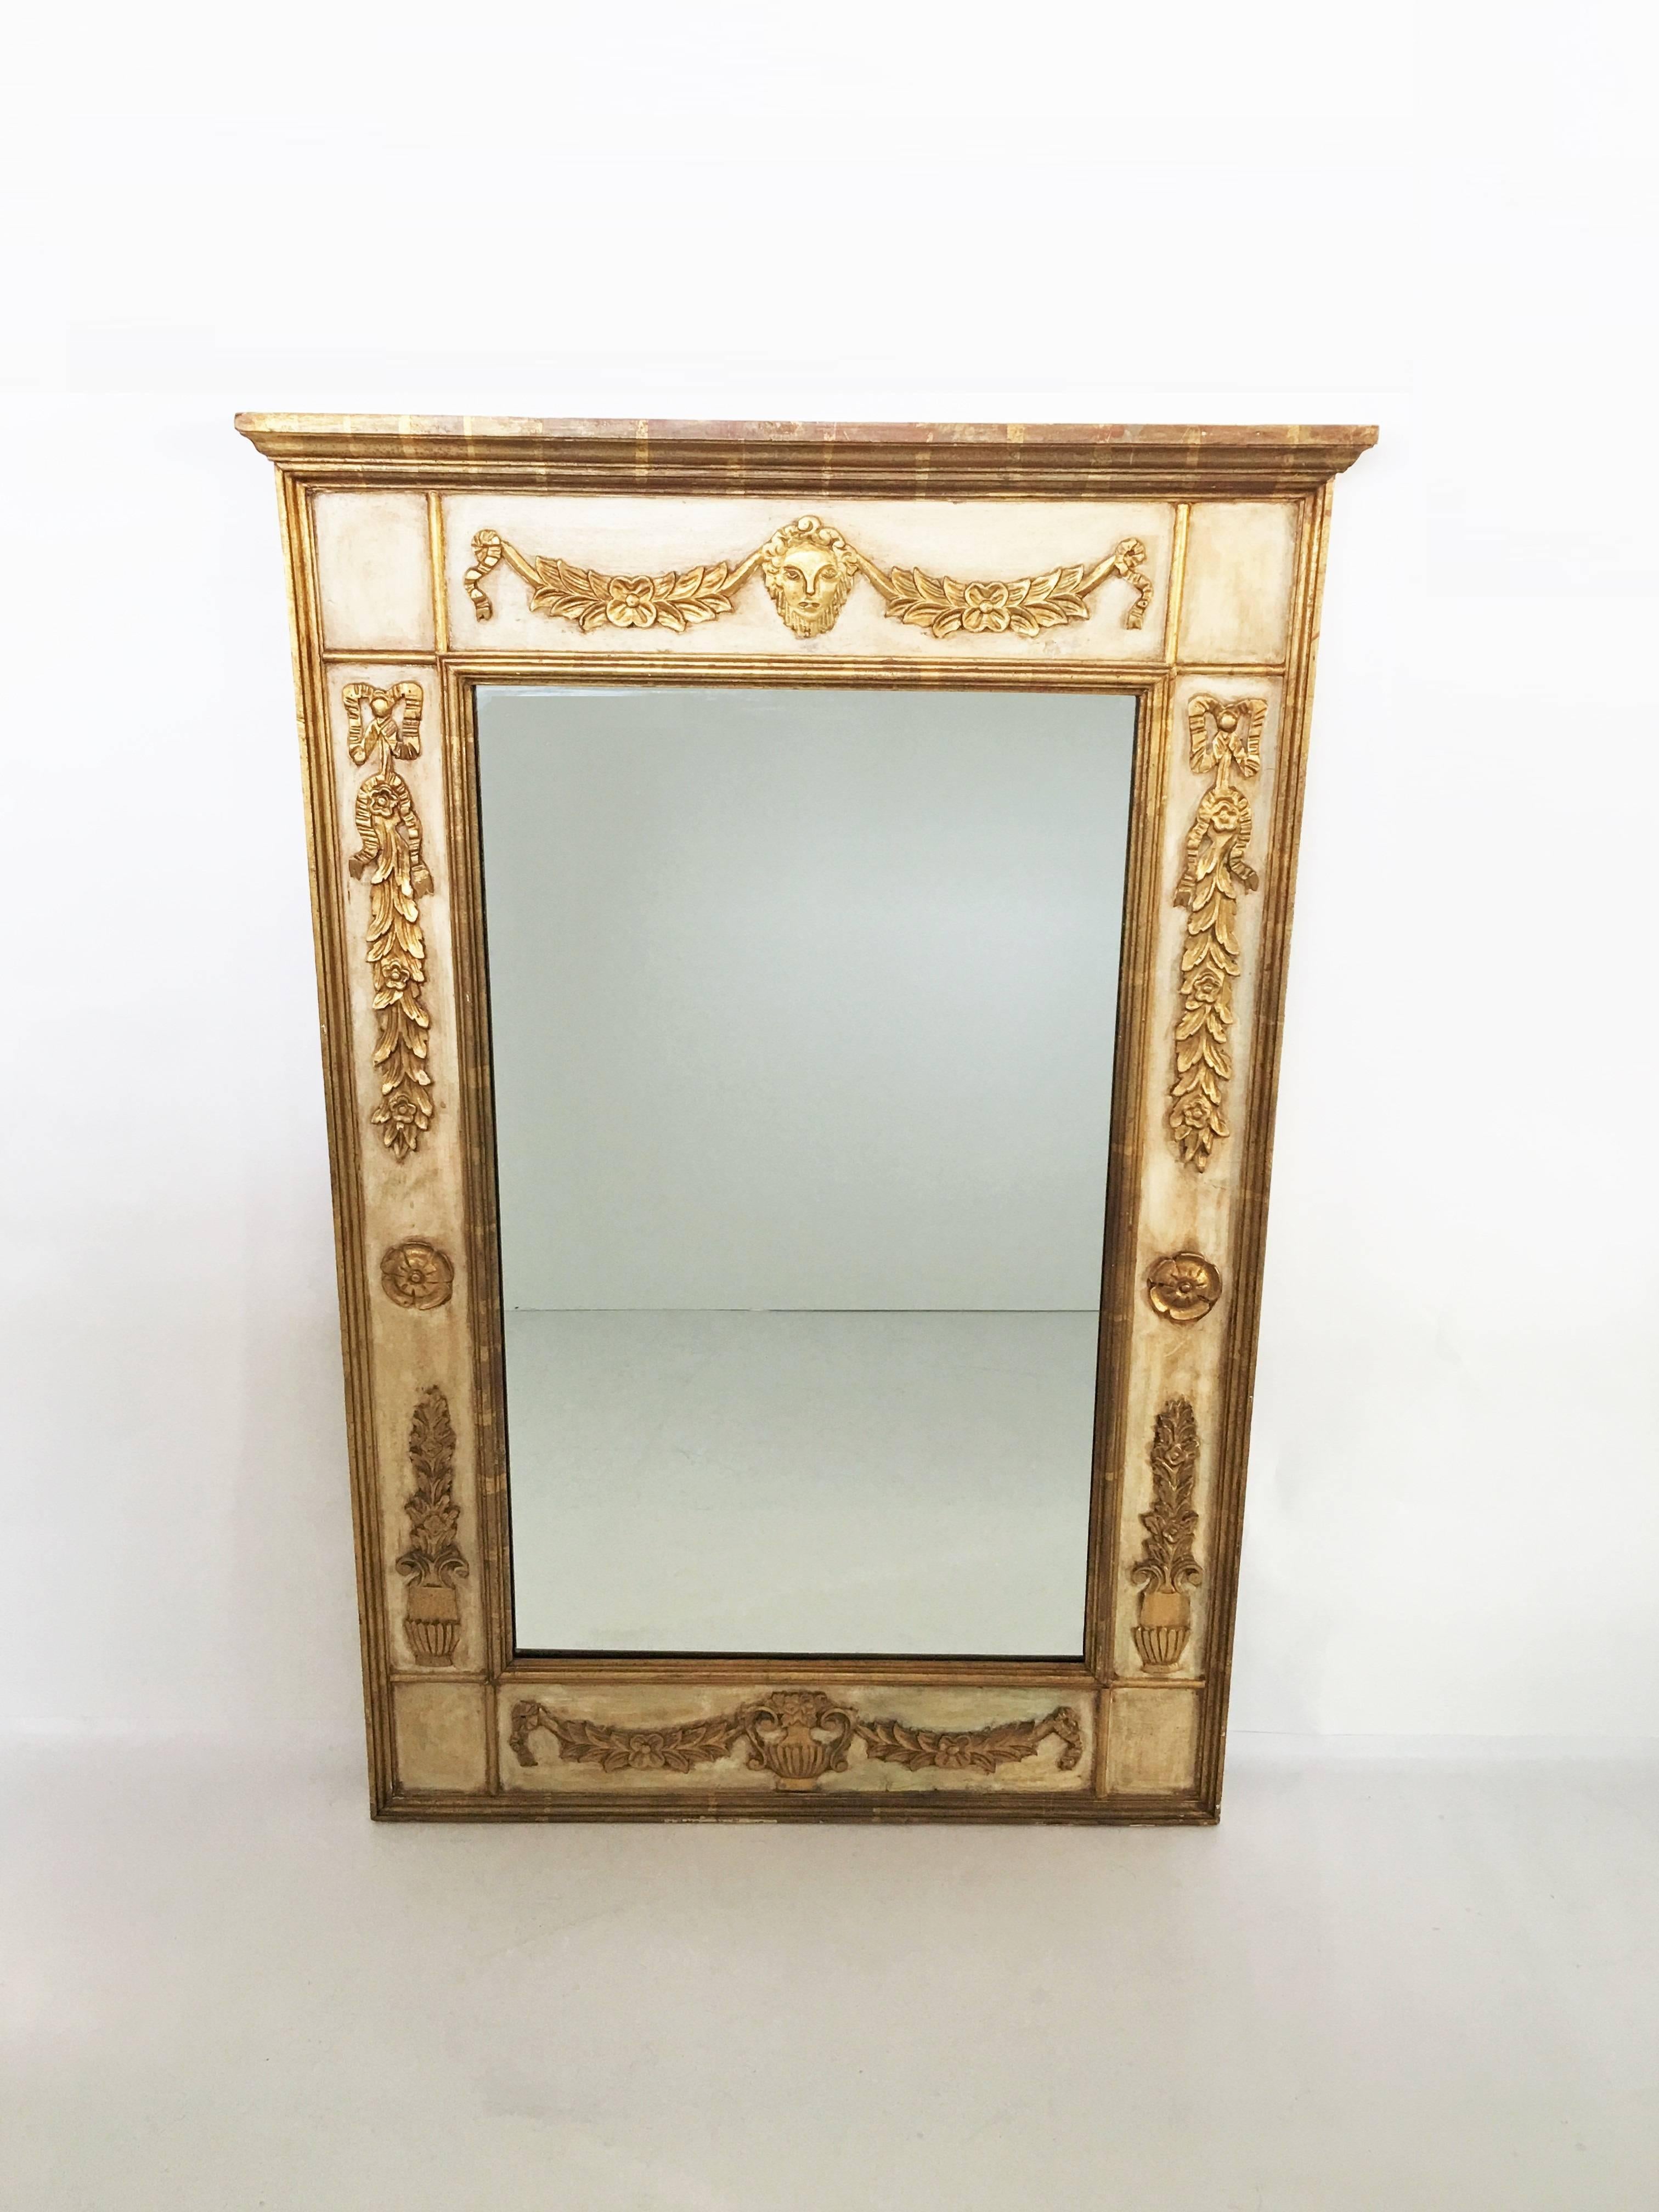 Italian Neoclassical Painted Giltwood Demilune Console with Matching Mirror For Sale 2